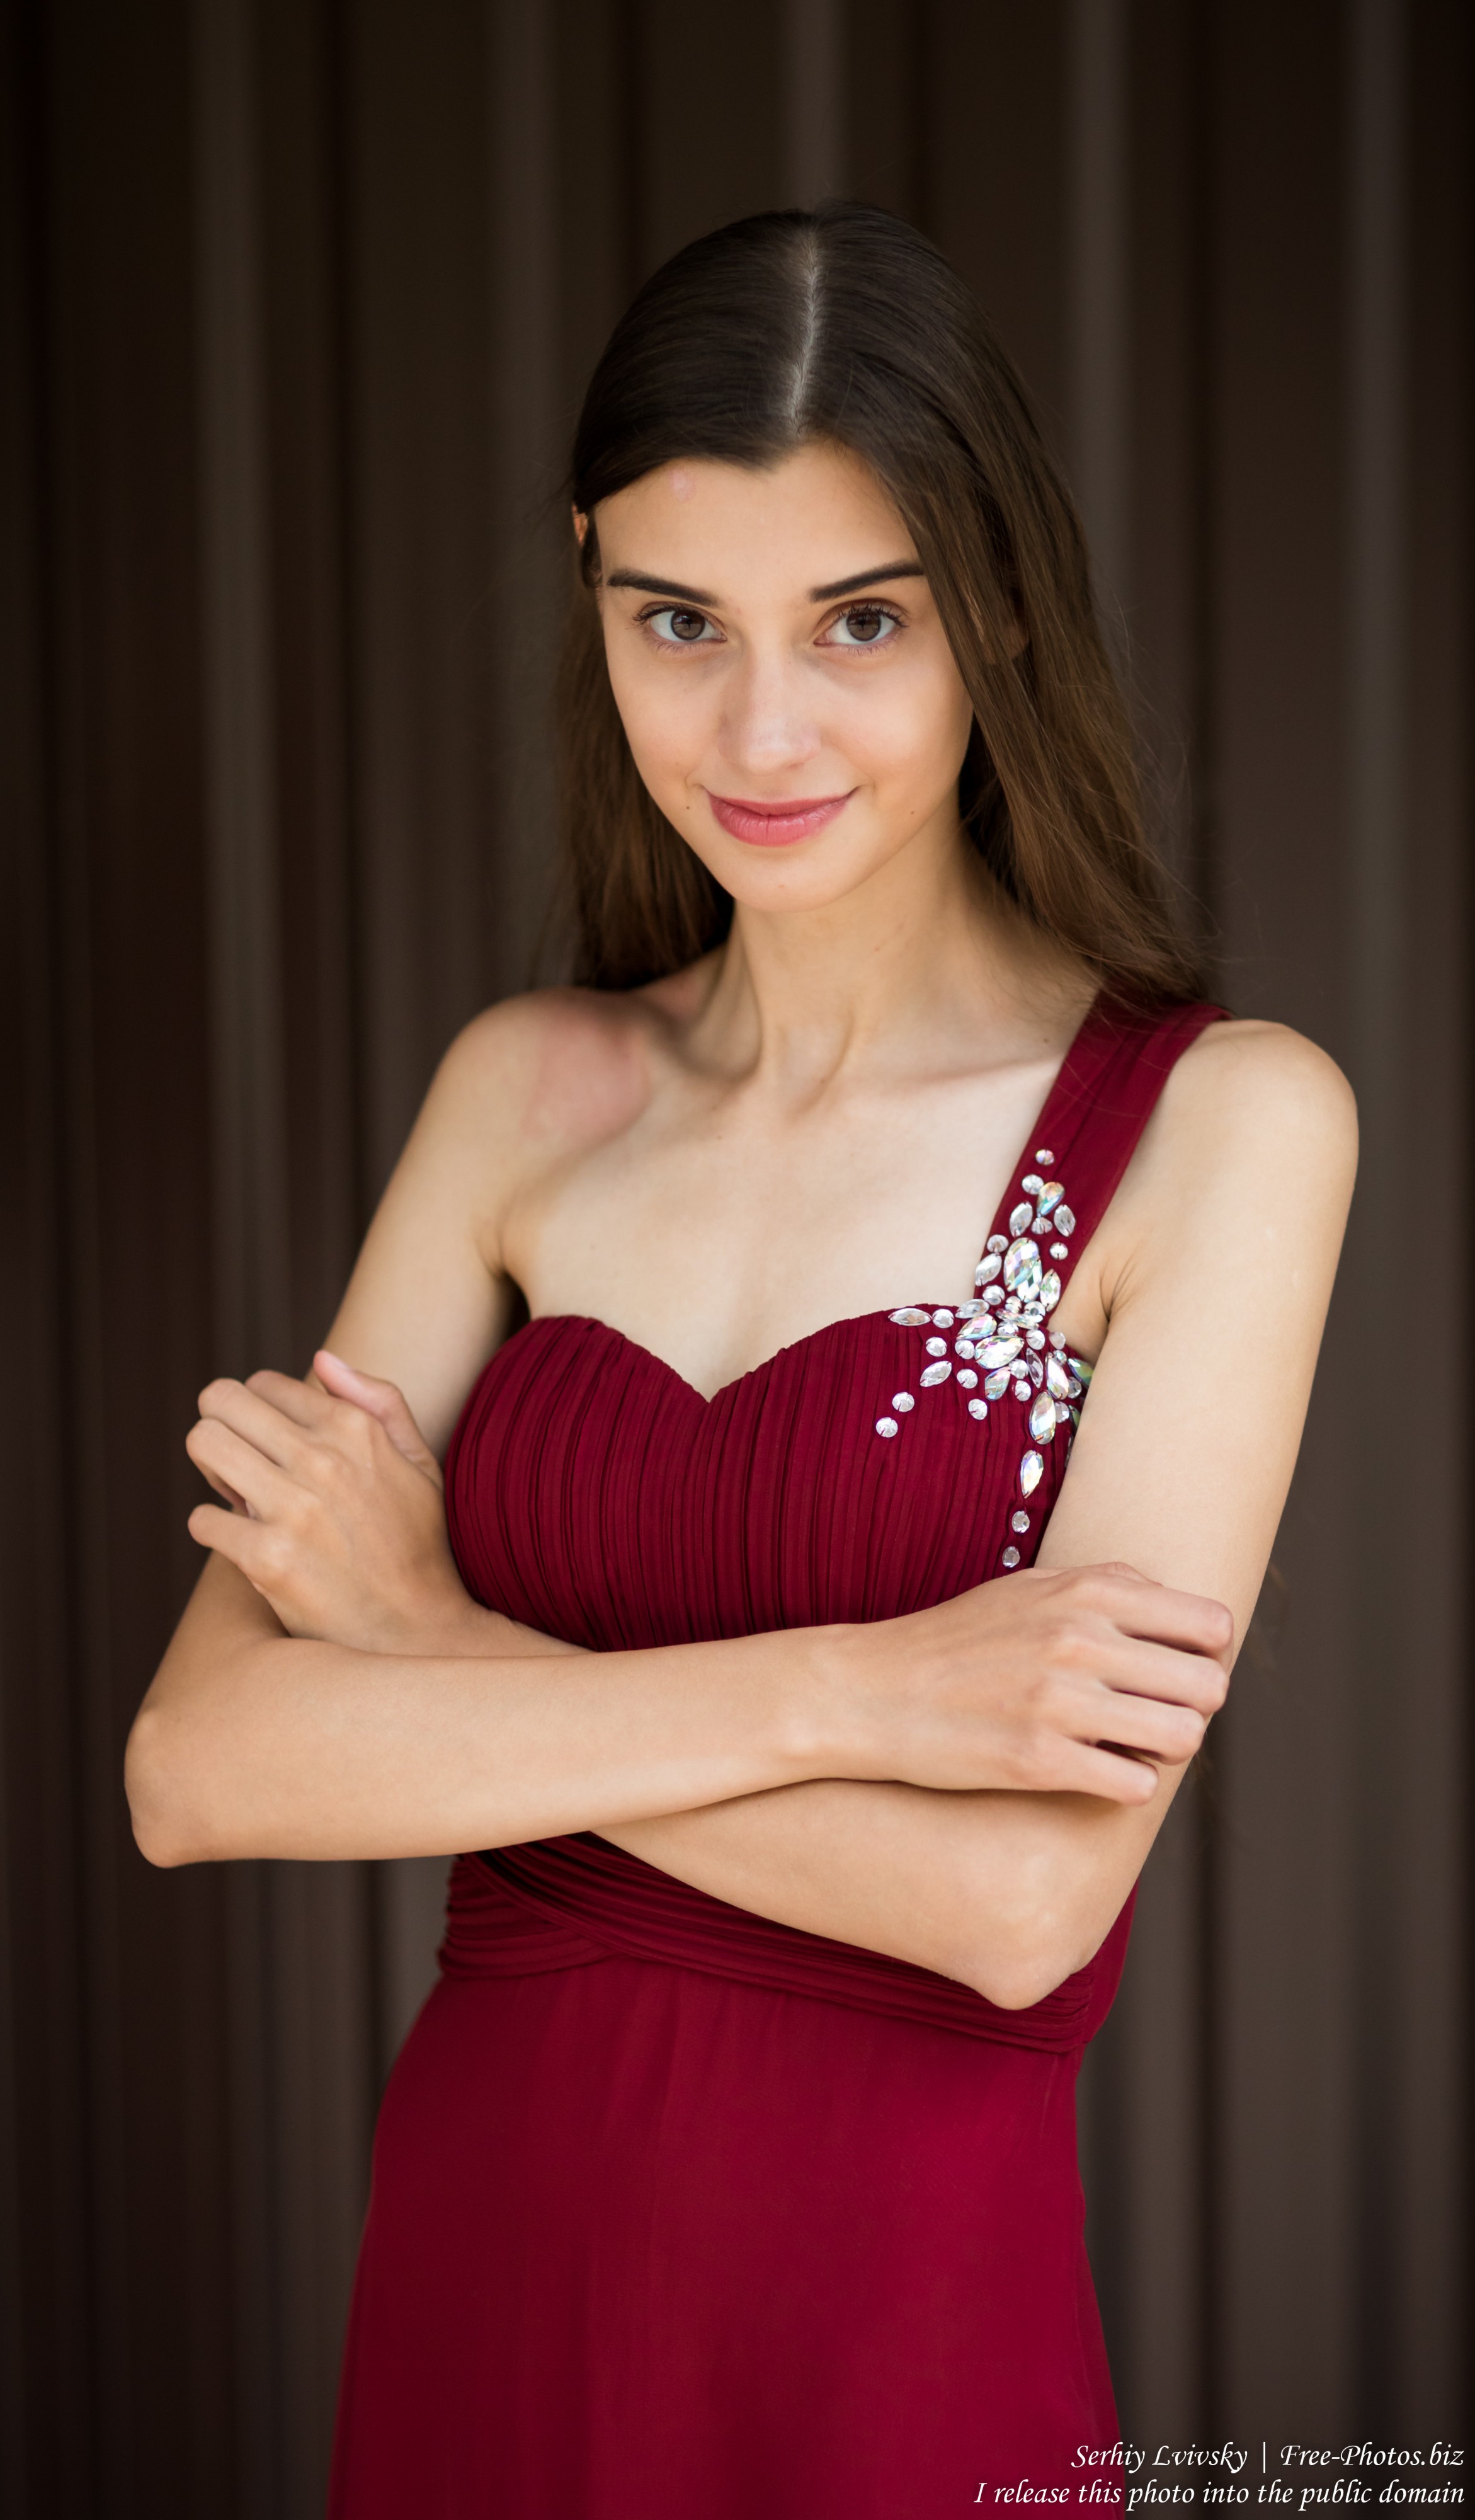 Photo Of Olesya A 19 Year Old Woman Photographed In July 2019 By